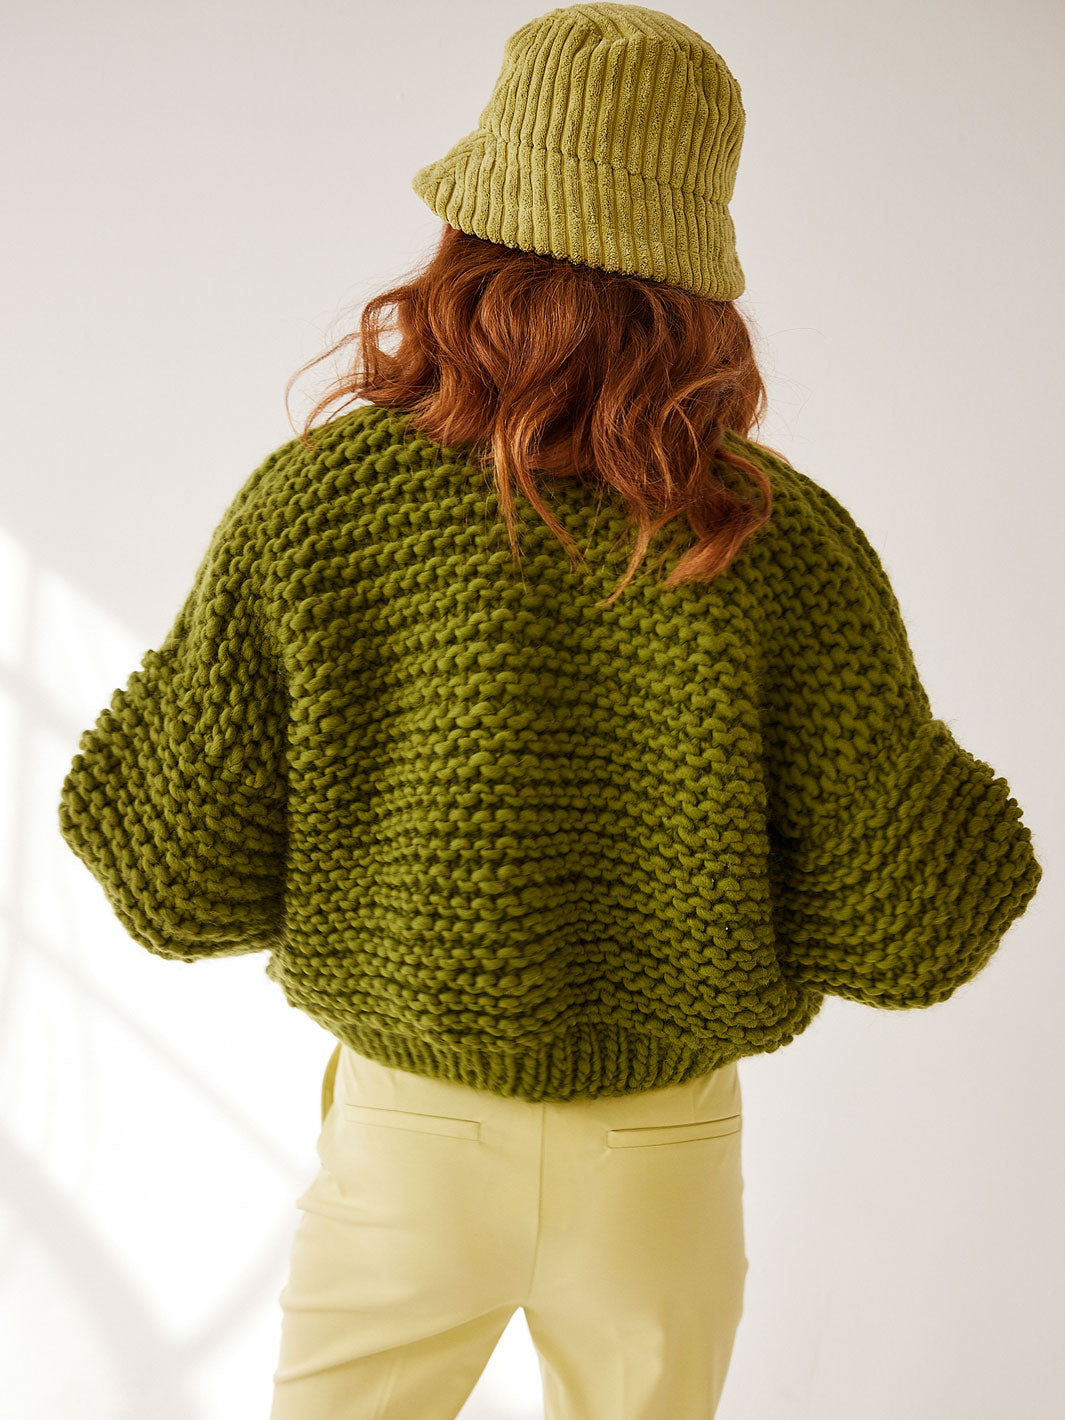 Girl stands with her back to the camera wearing a chunky knitted green cardigan